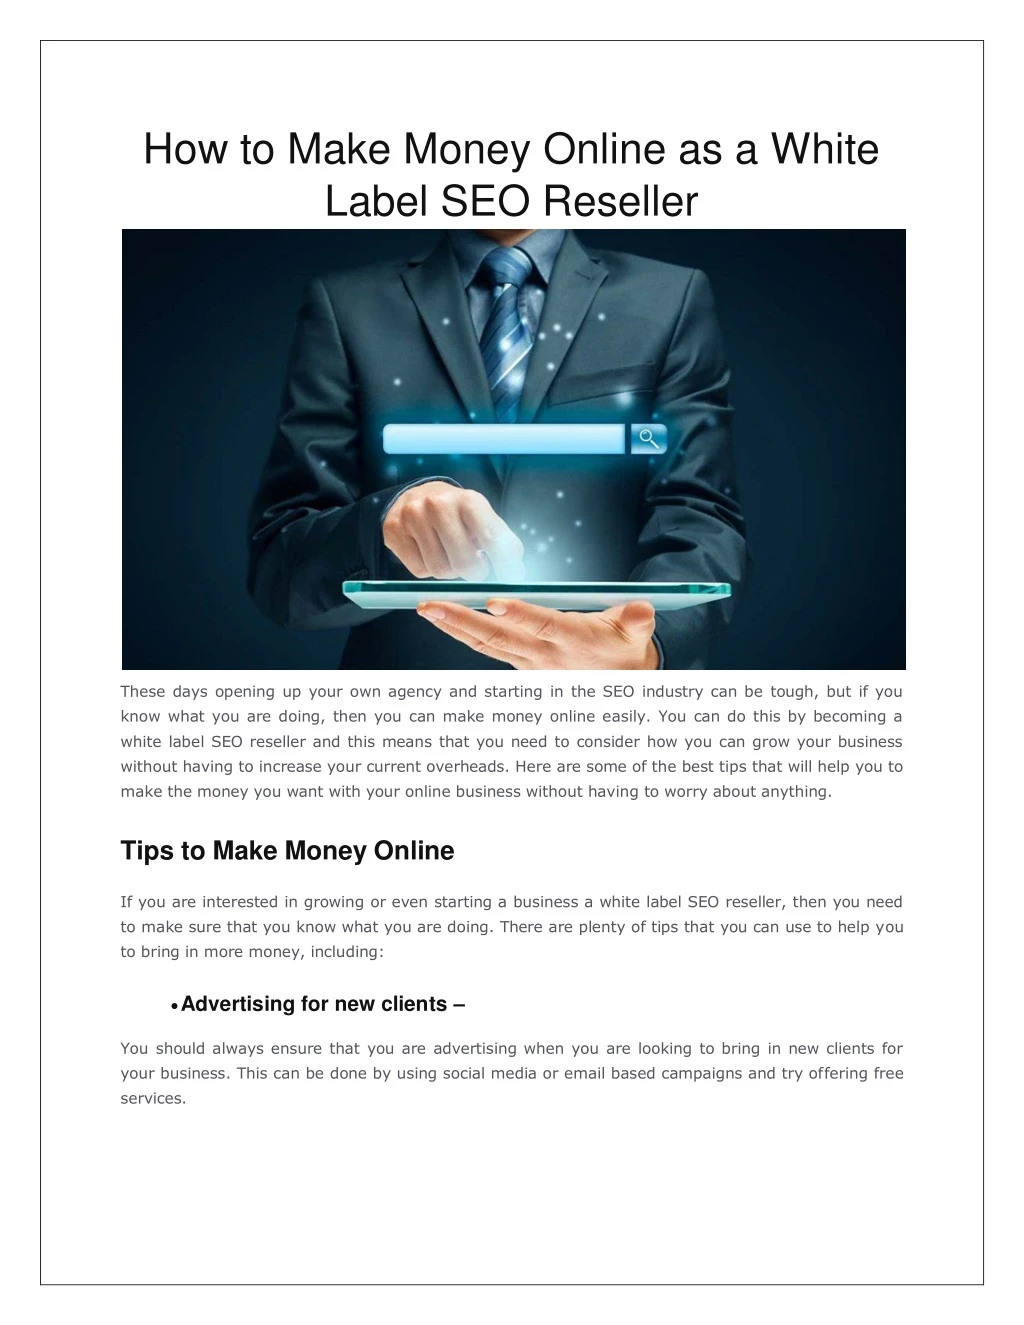 how to make money online as a white label